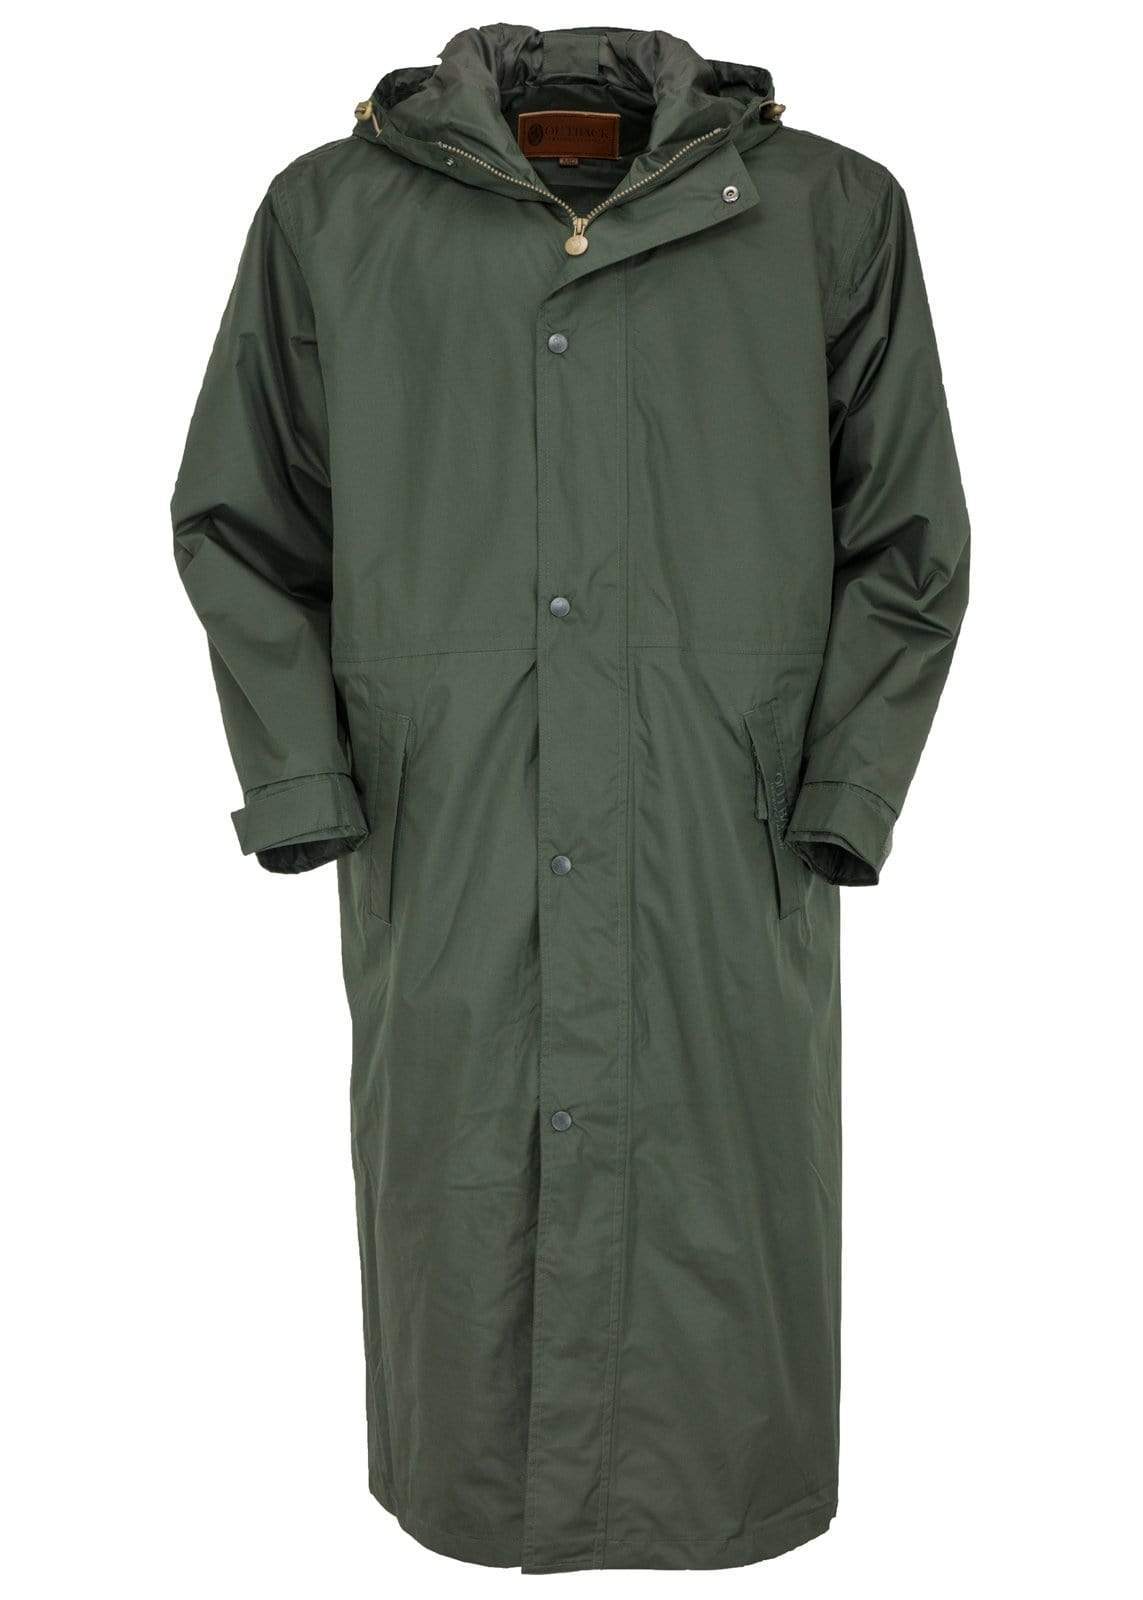 Outback Trading Company Pak-A-Roo Duster Dark Olive / XS 2406-DOL-XS 089043130202 Duster Coats